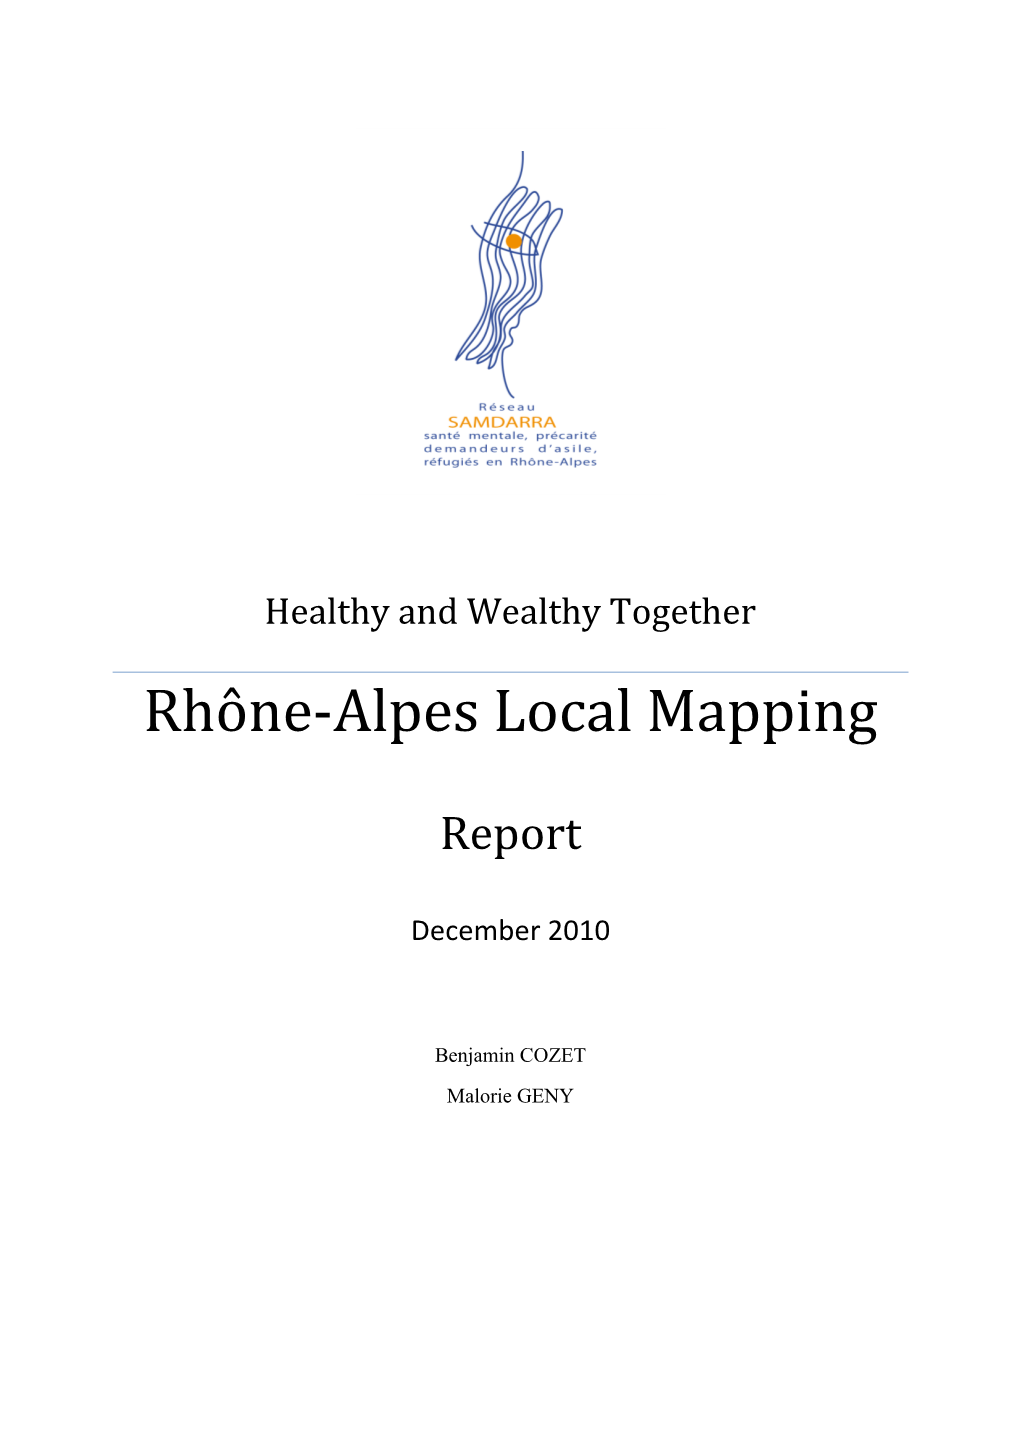 Healthy and Wealthy Together Rhône-Alpes Local Mapping